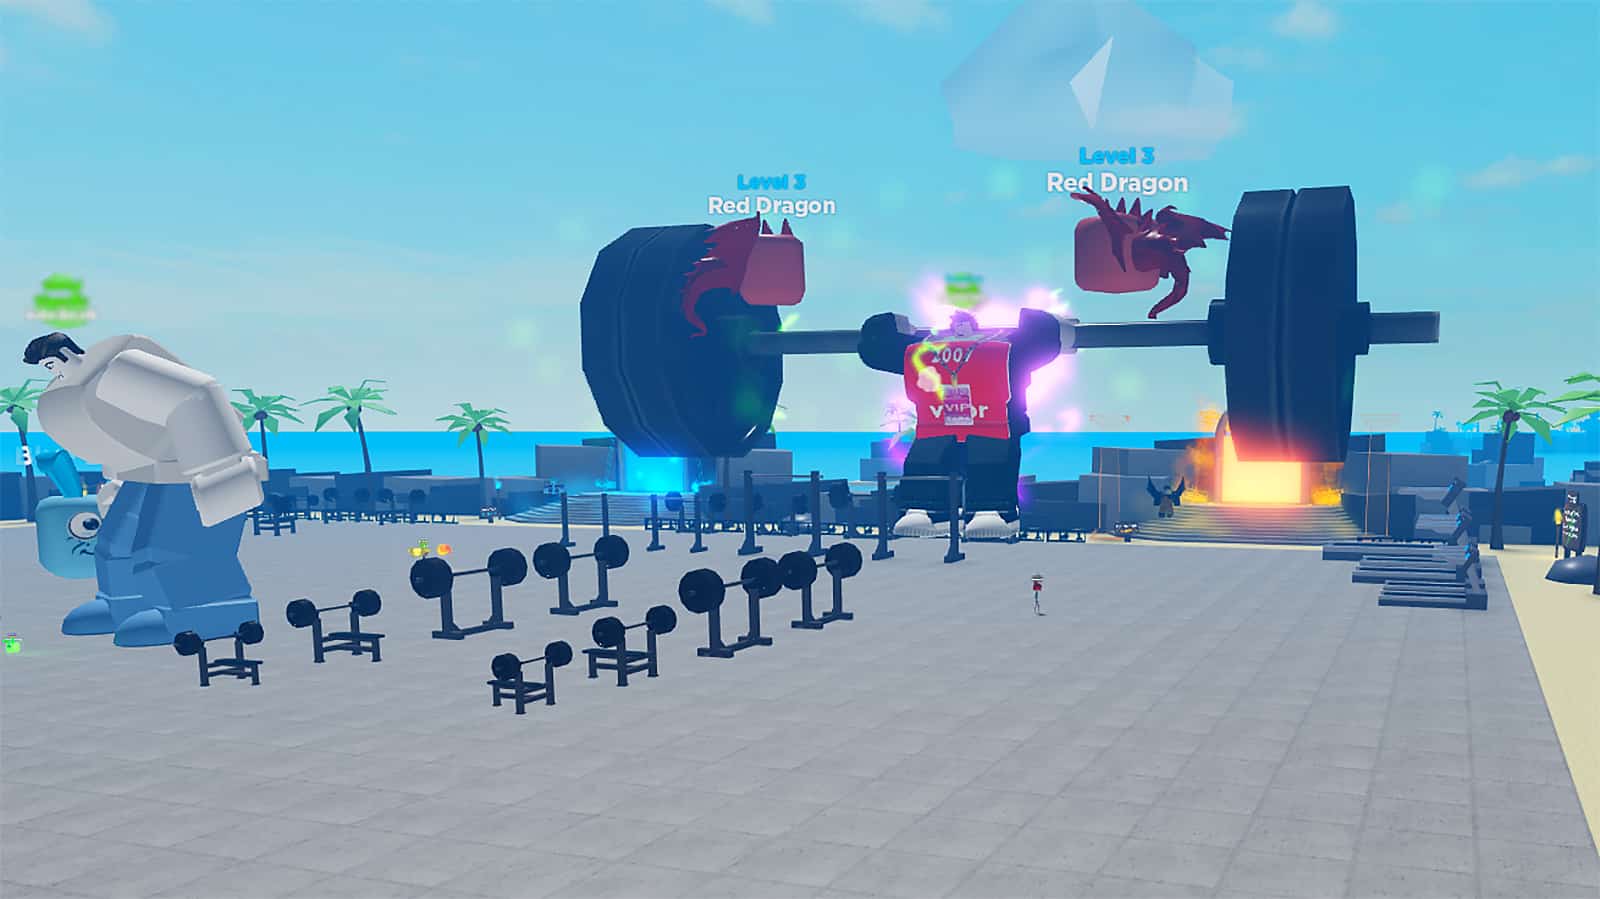 Roblox Strong Muscle Simulator Codes (February 2023)